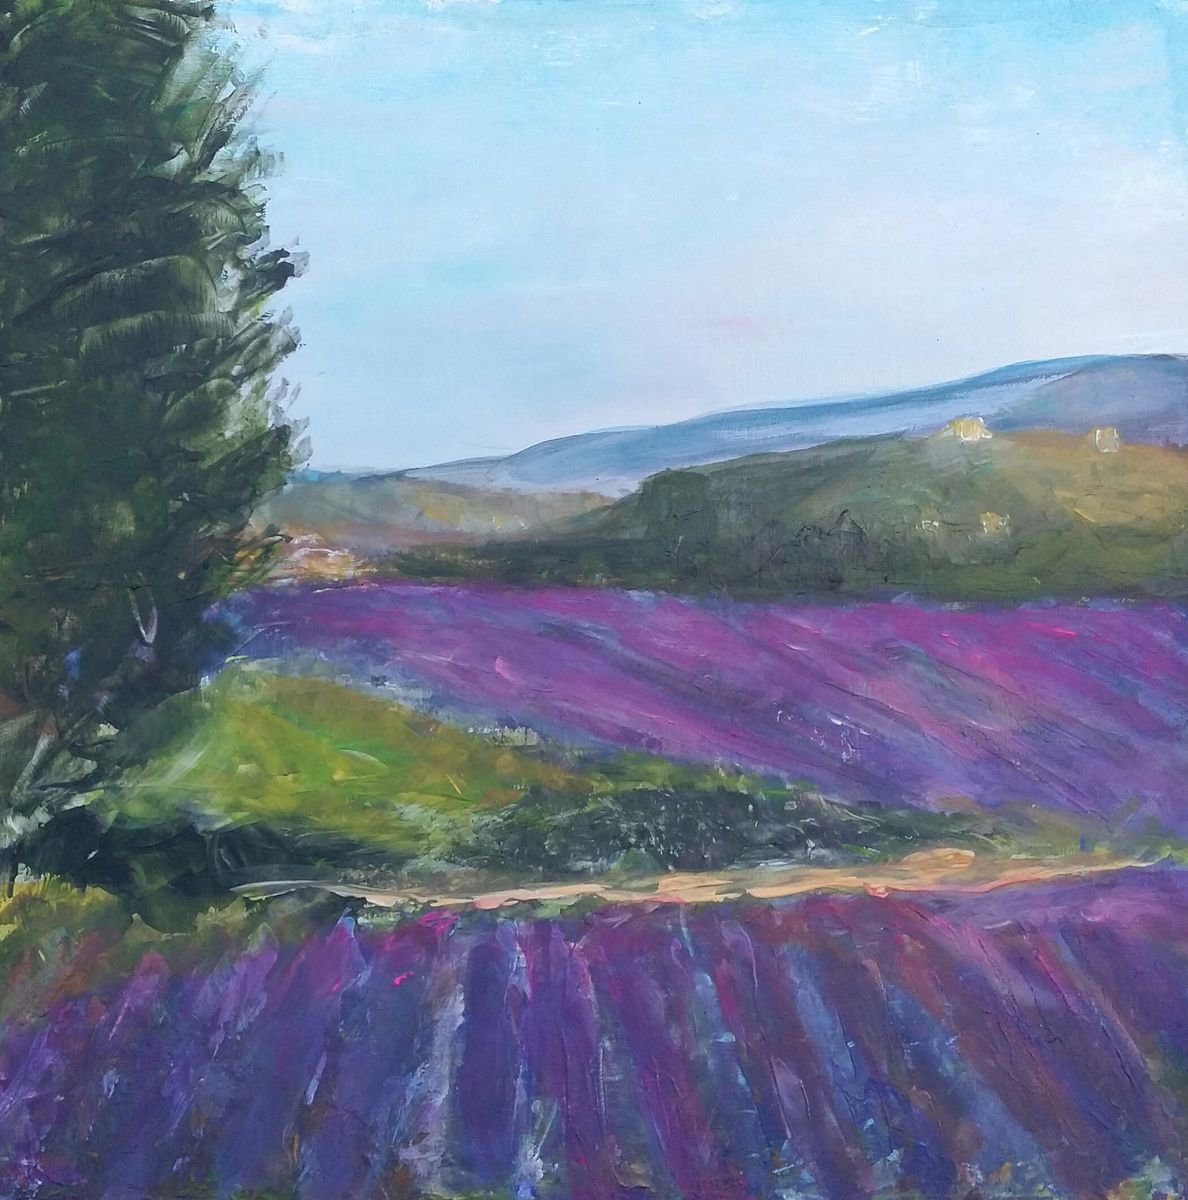 Lavender in the provence 2 by Els Driesen